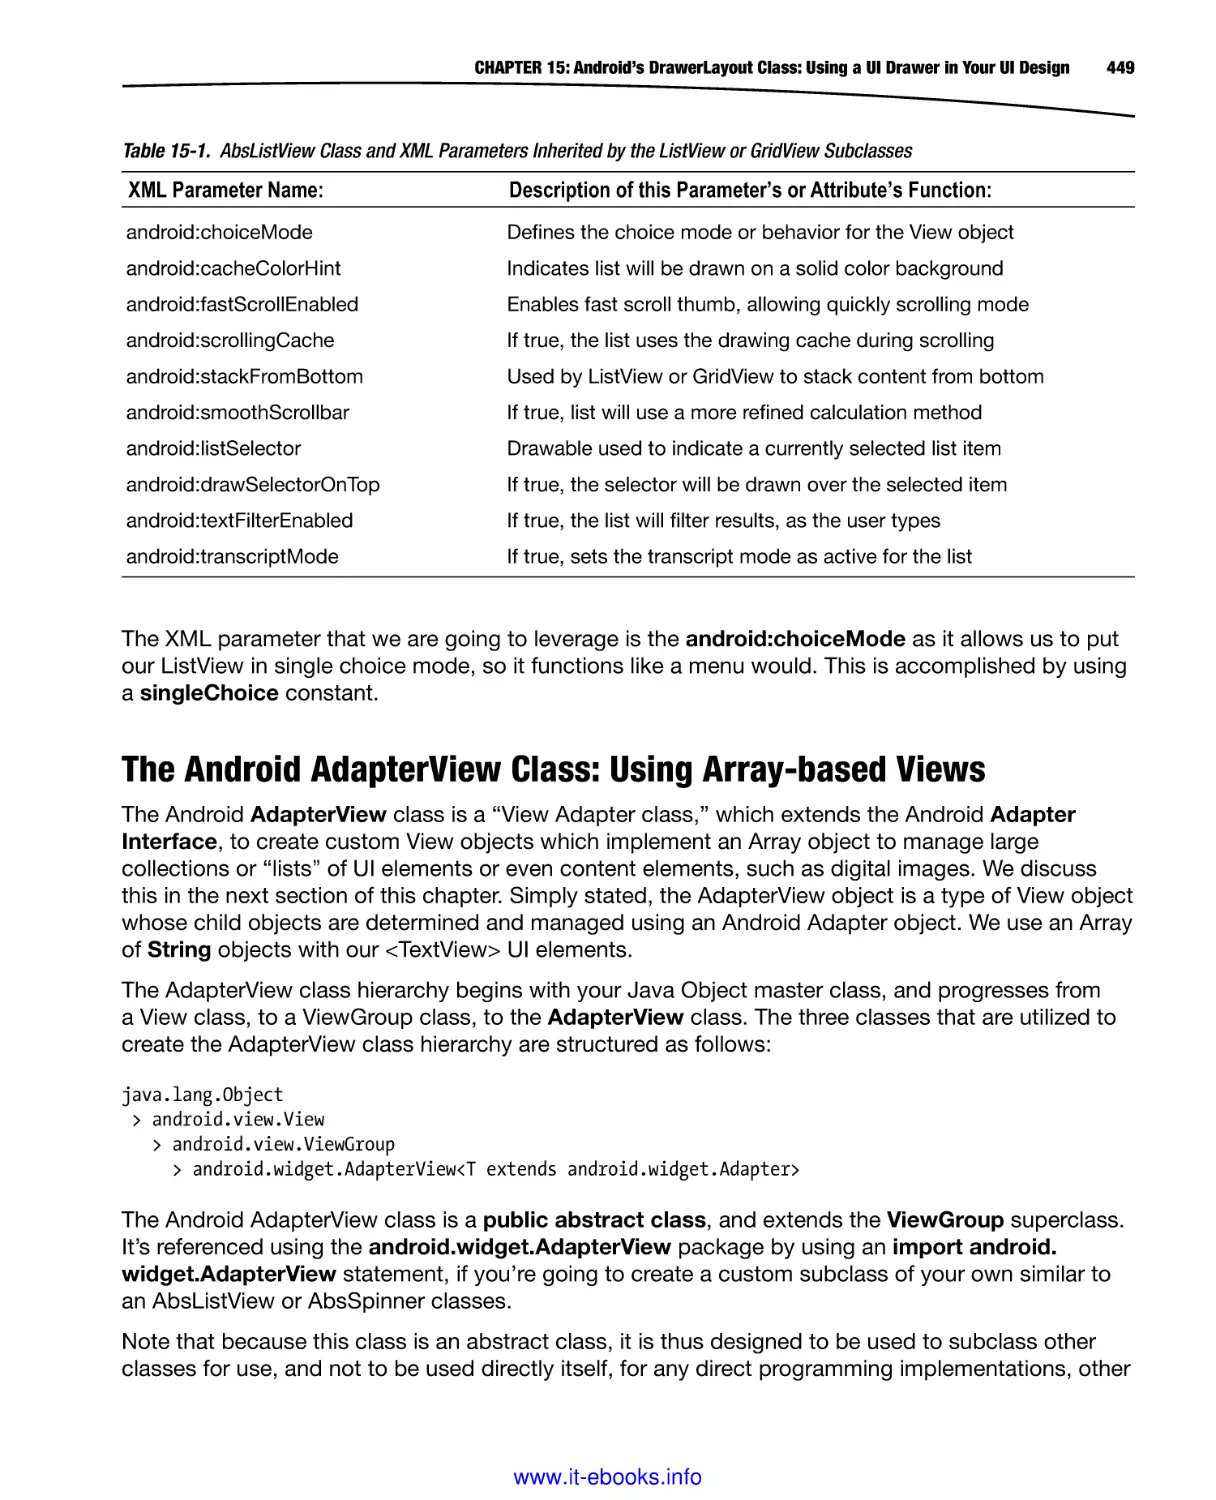 The Android AdapterView Class